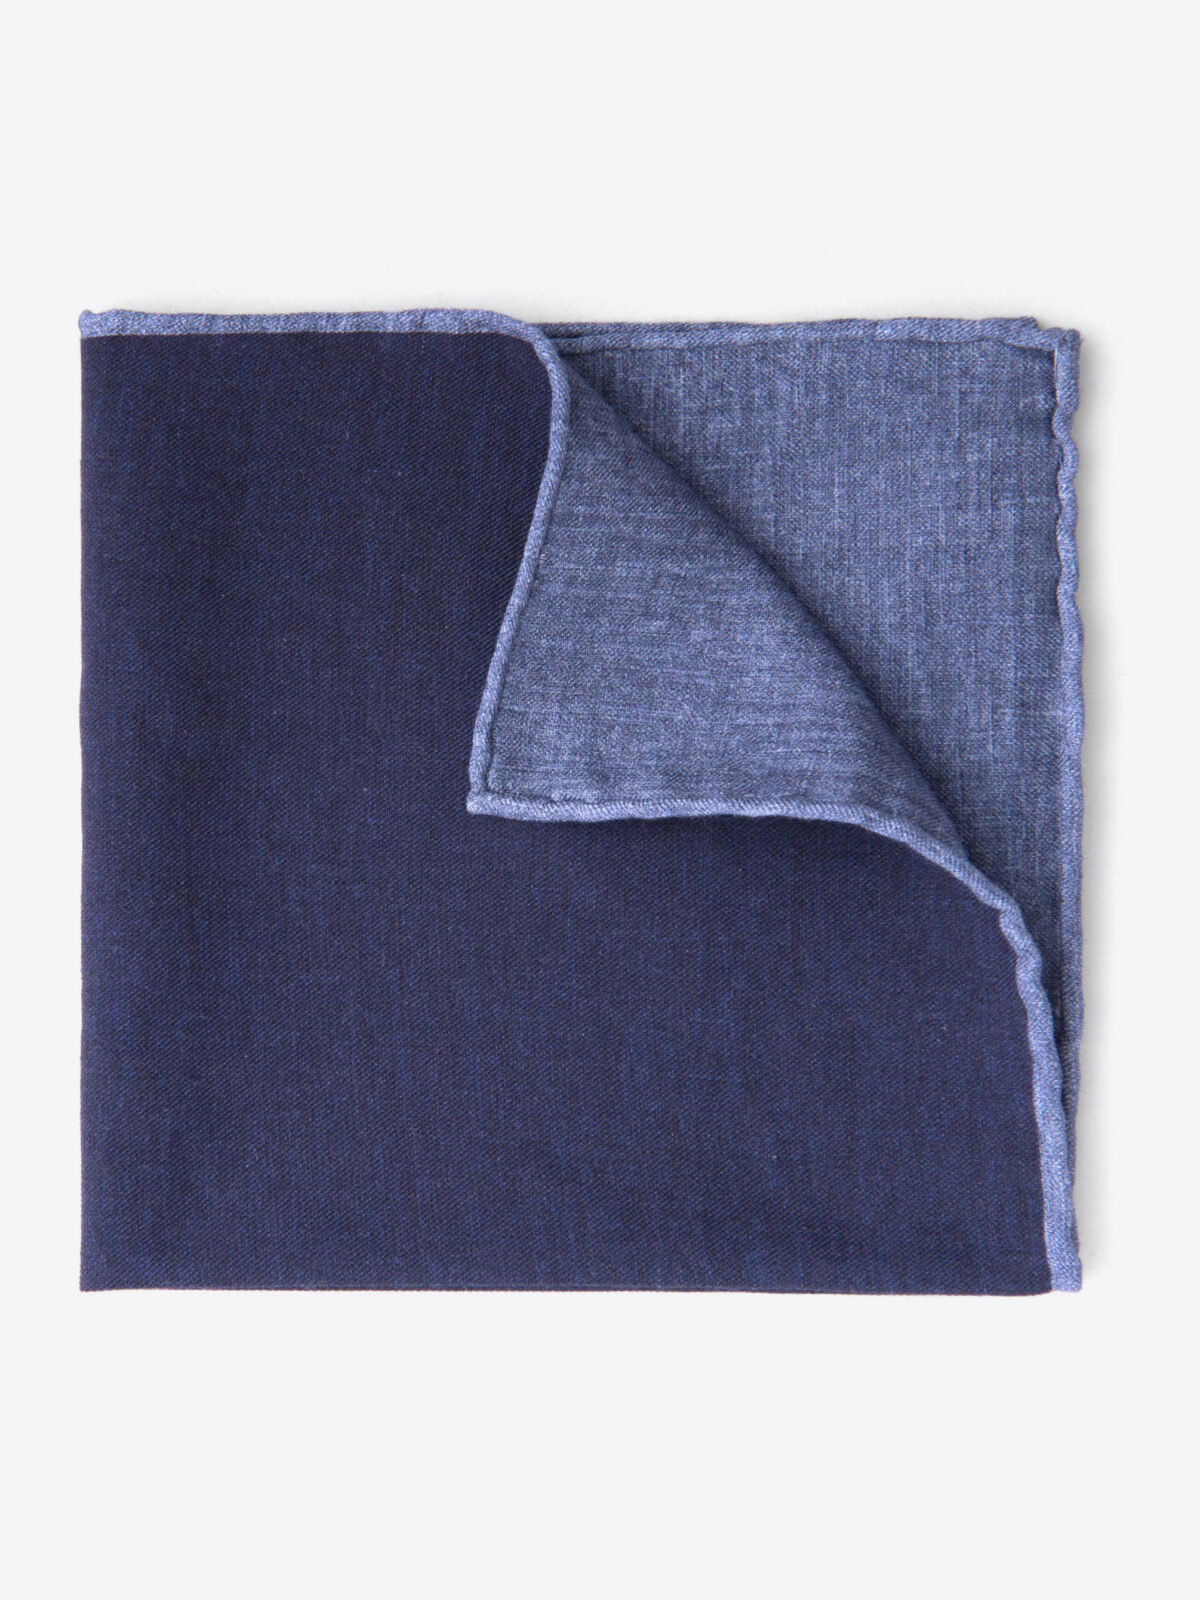 Navy Melange Wool and Cotton Pocket Square by Proper Cloth